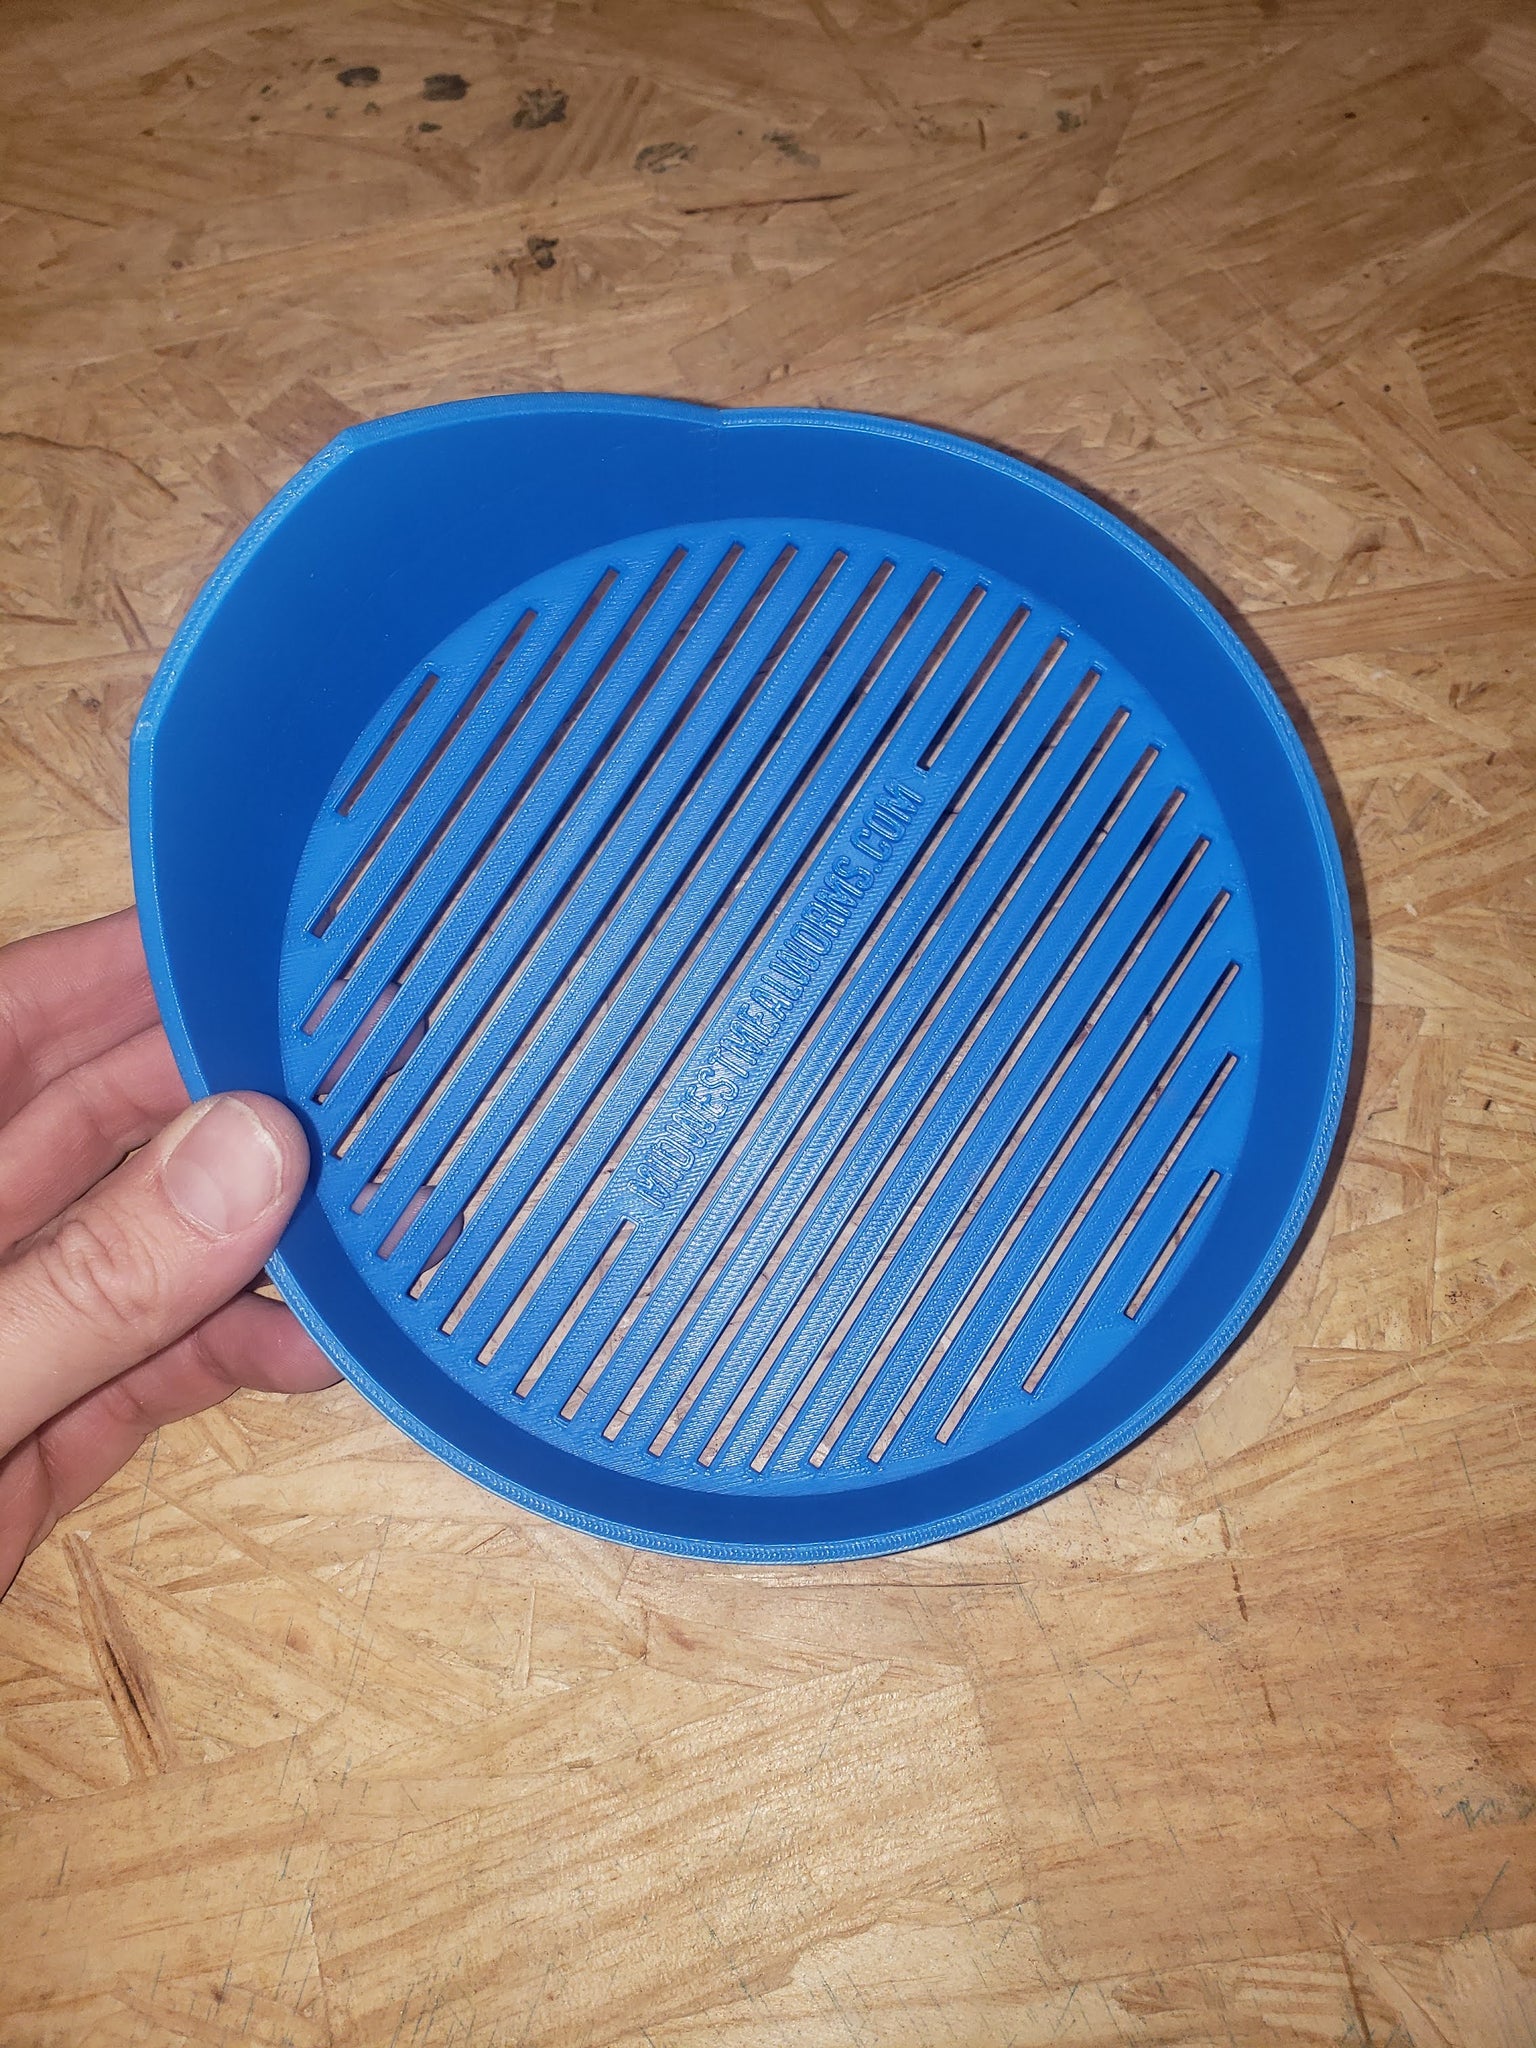 Mealworm sifting tray